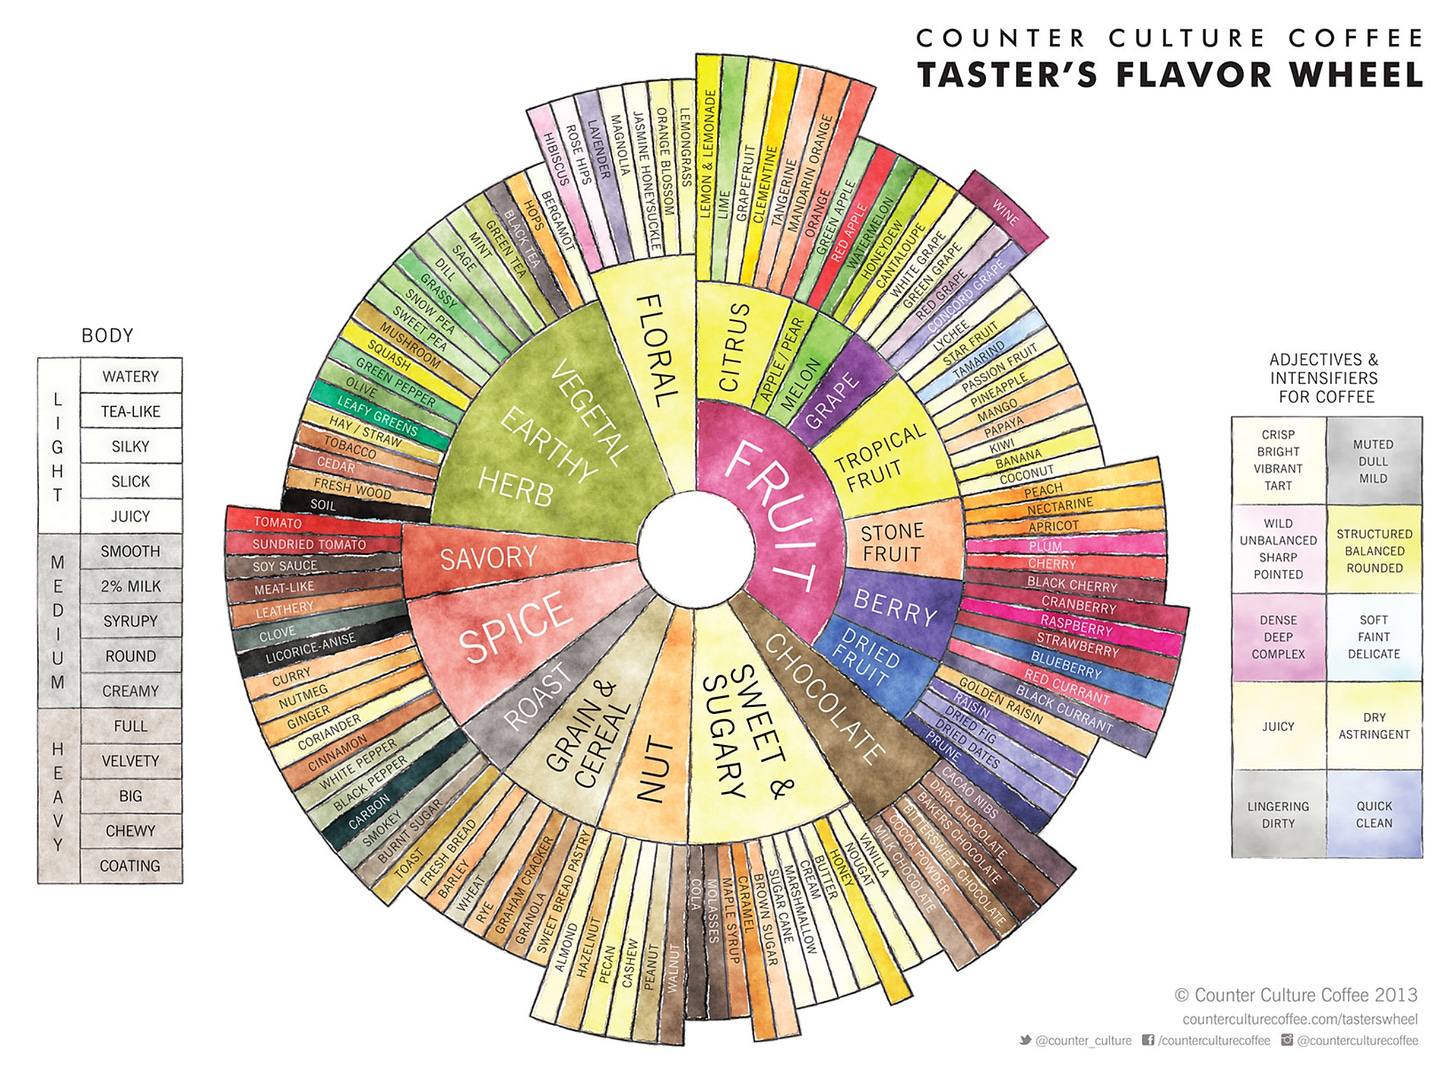 A colorful coffee flavor wheel showing all the different possible flavors found in coffee like fruit, chocolate or spice, and broken down by section.